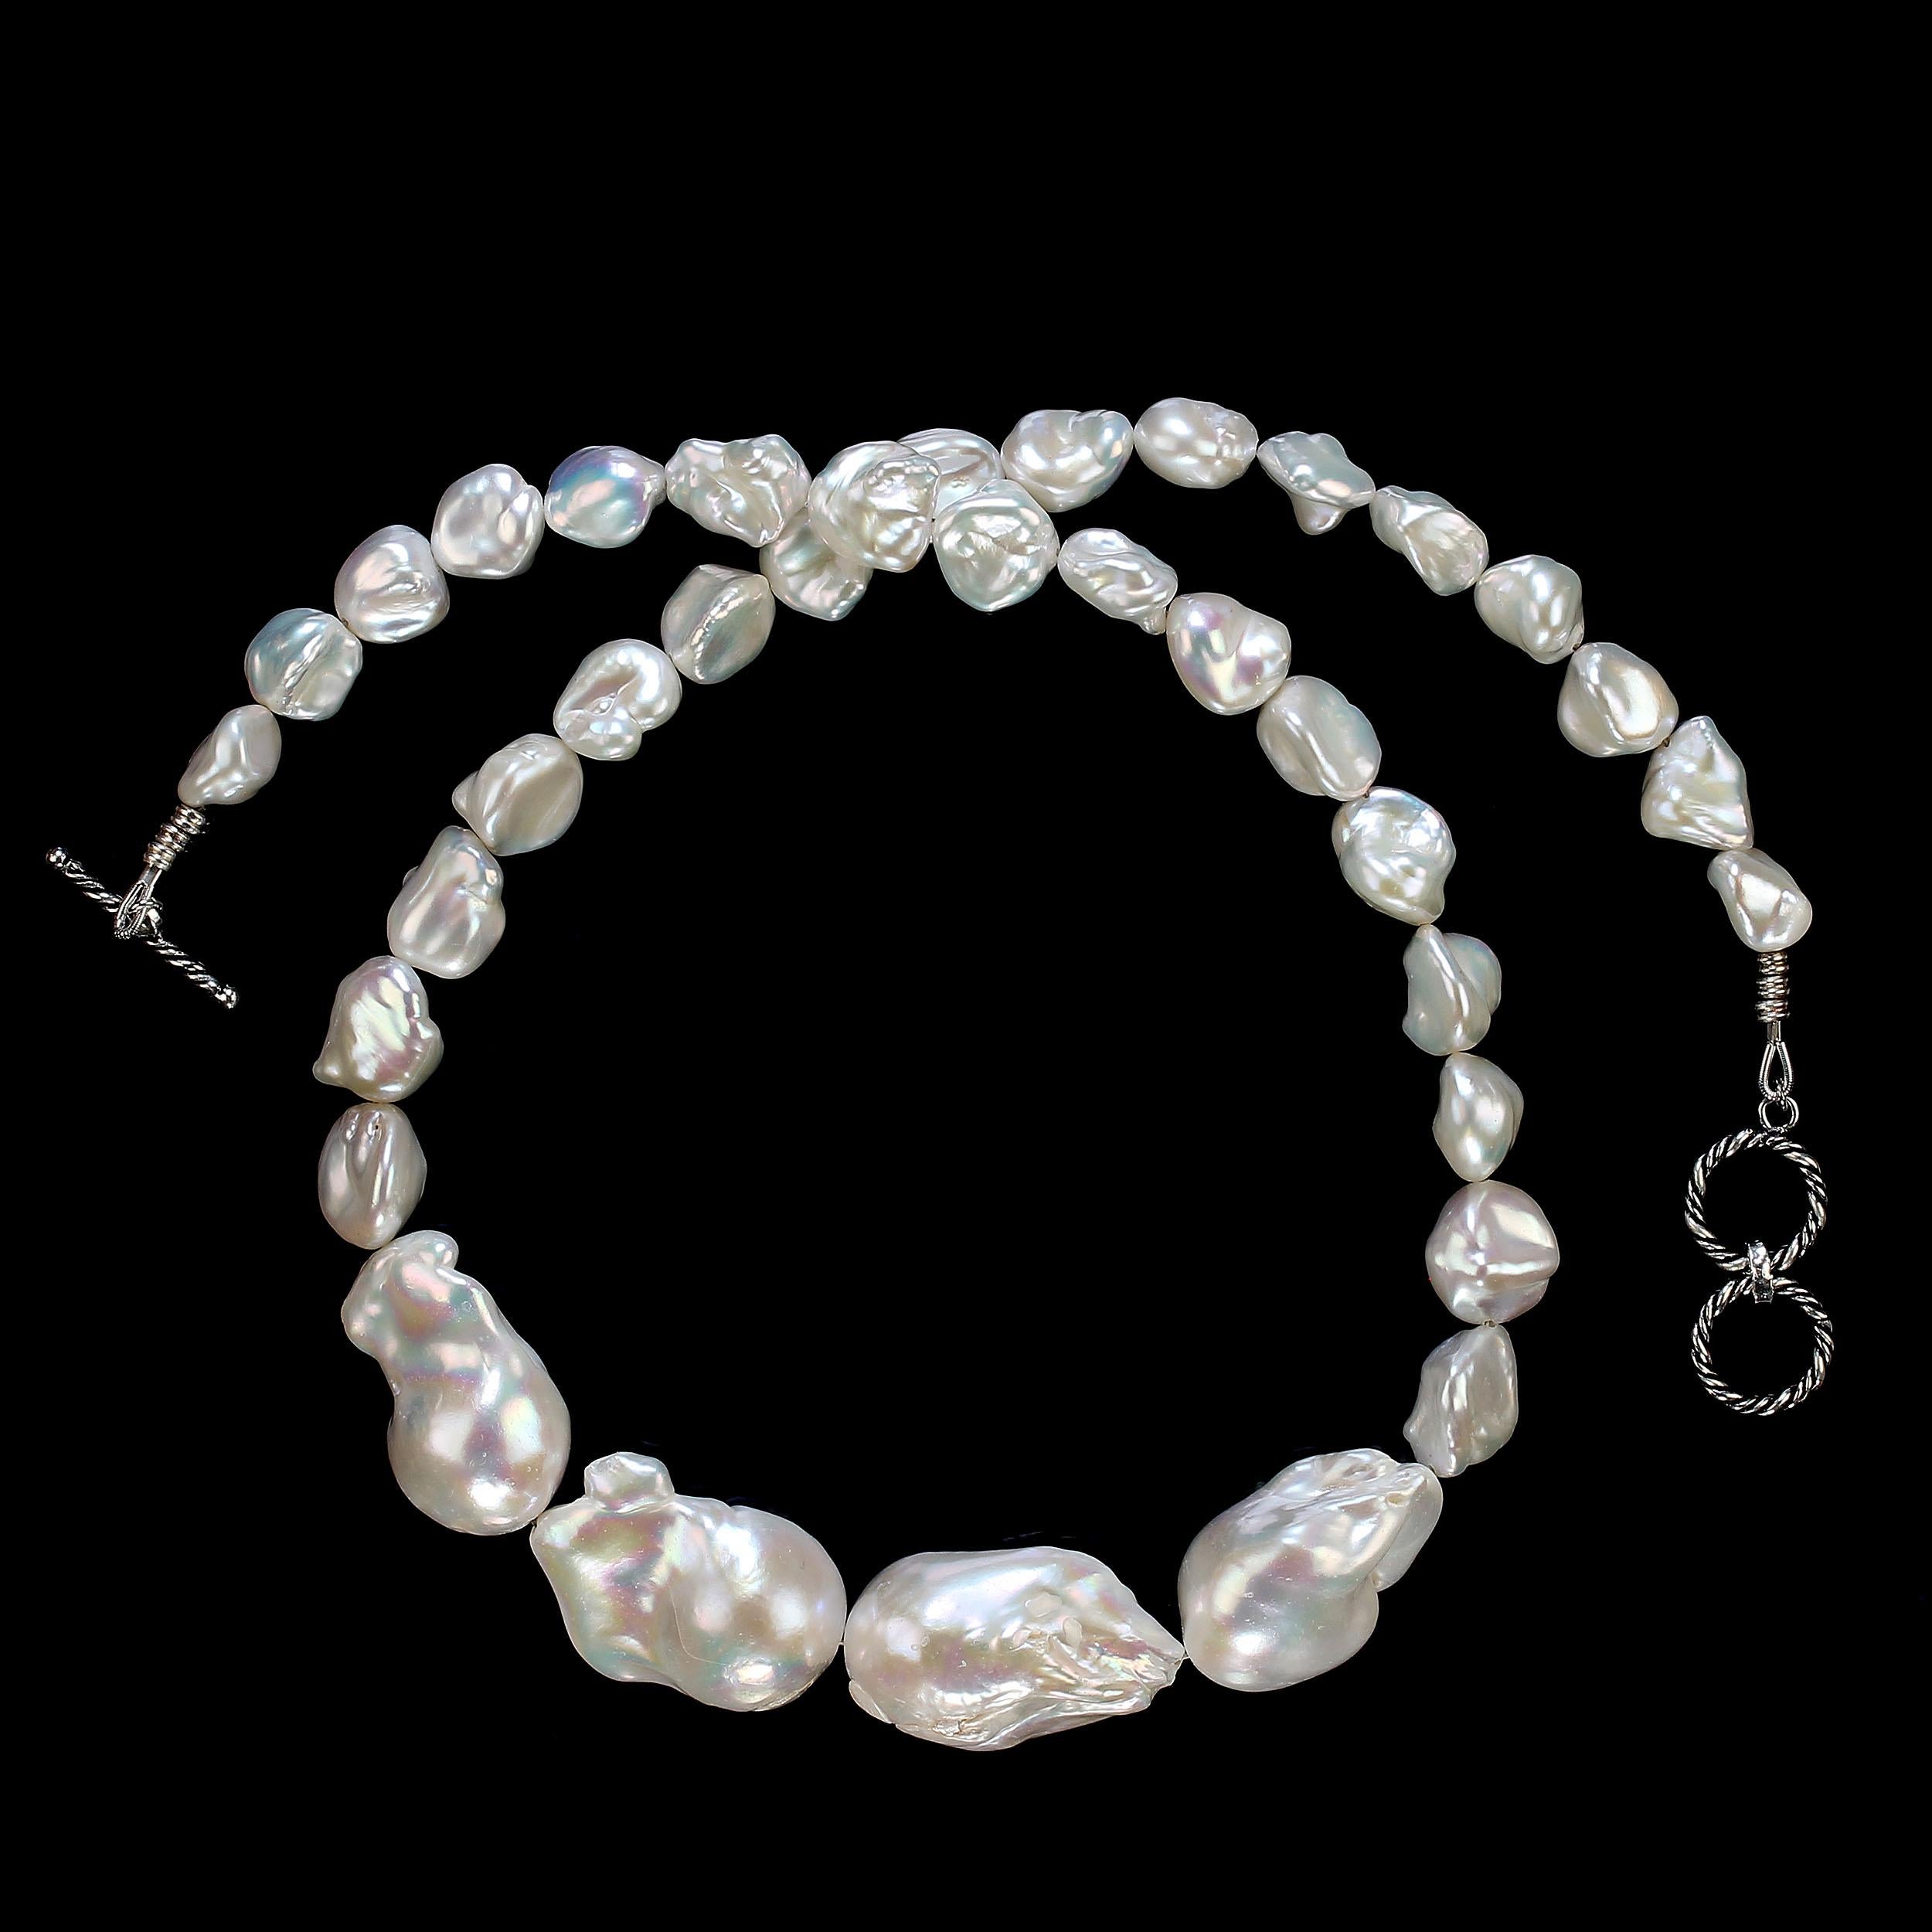 23-Inch statement necklace of white chinese freshwater pearls, 12 x12mm, with four focal large white baroque pearls approximately 28-30mm at the front of the necklace.  All of these magnificent pearls are iridescent.  This 23-inch necklace is